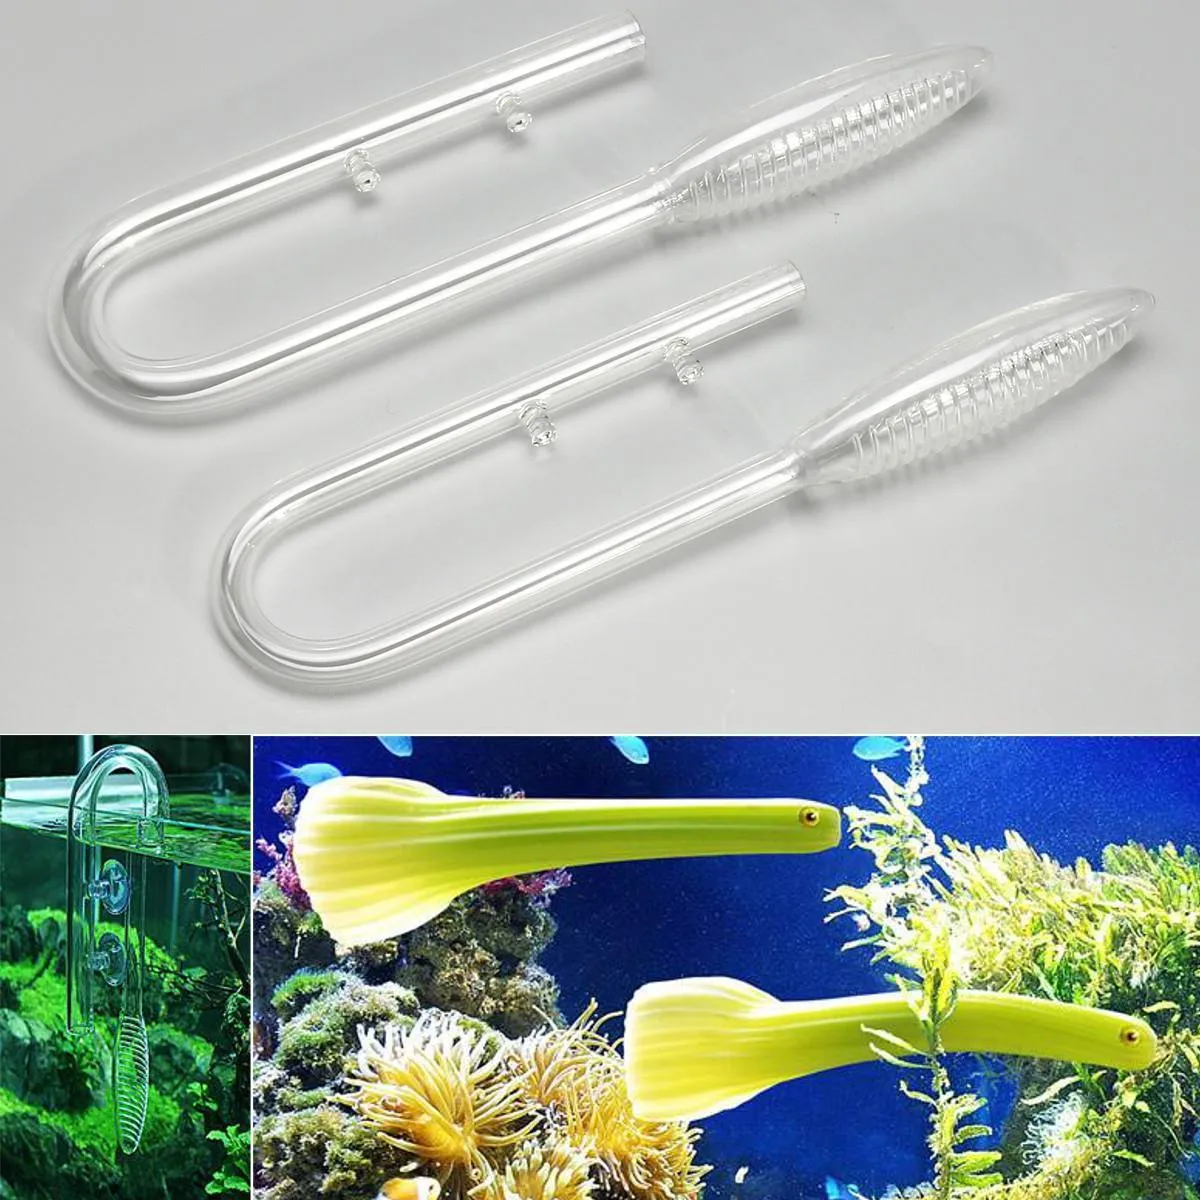 Rium Vistank Lily Violet In Clear Glass Pipe 1317 mm Buis Plant Filter Accessoire met zuigbekers Set Y200917